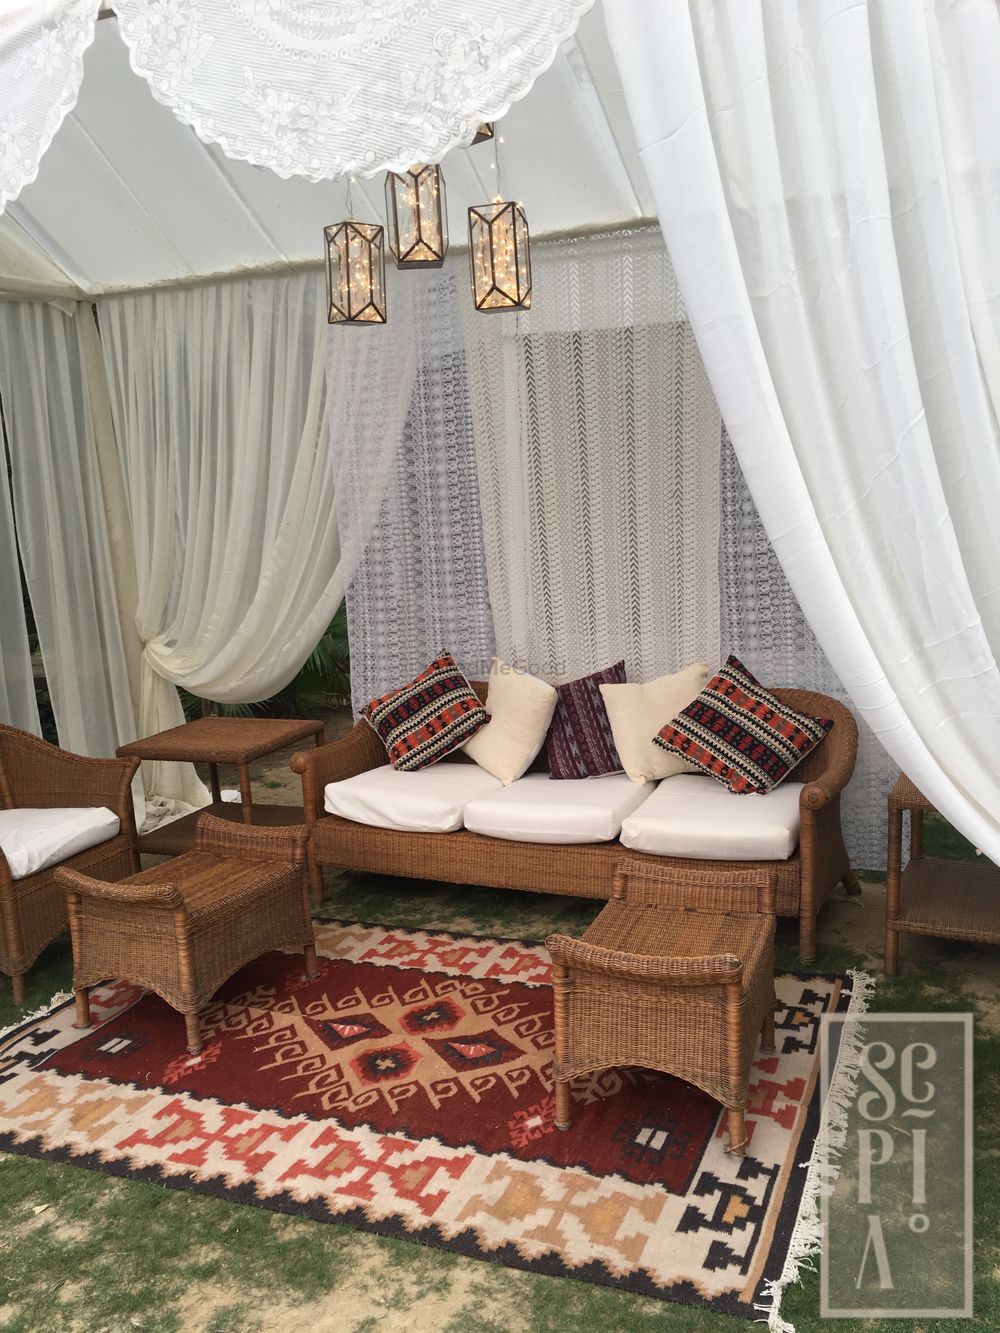 Photo of Modern Persian influence decor with rugs and drapes